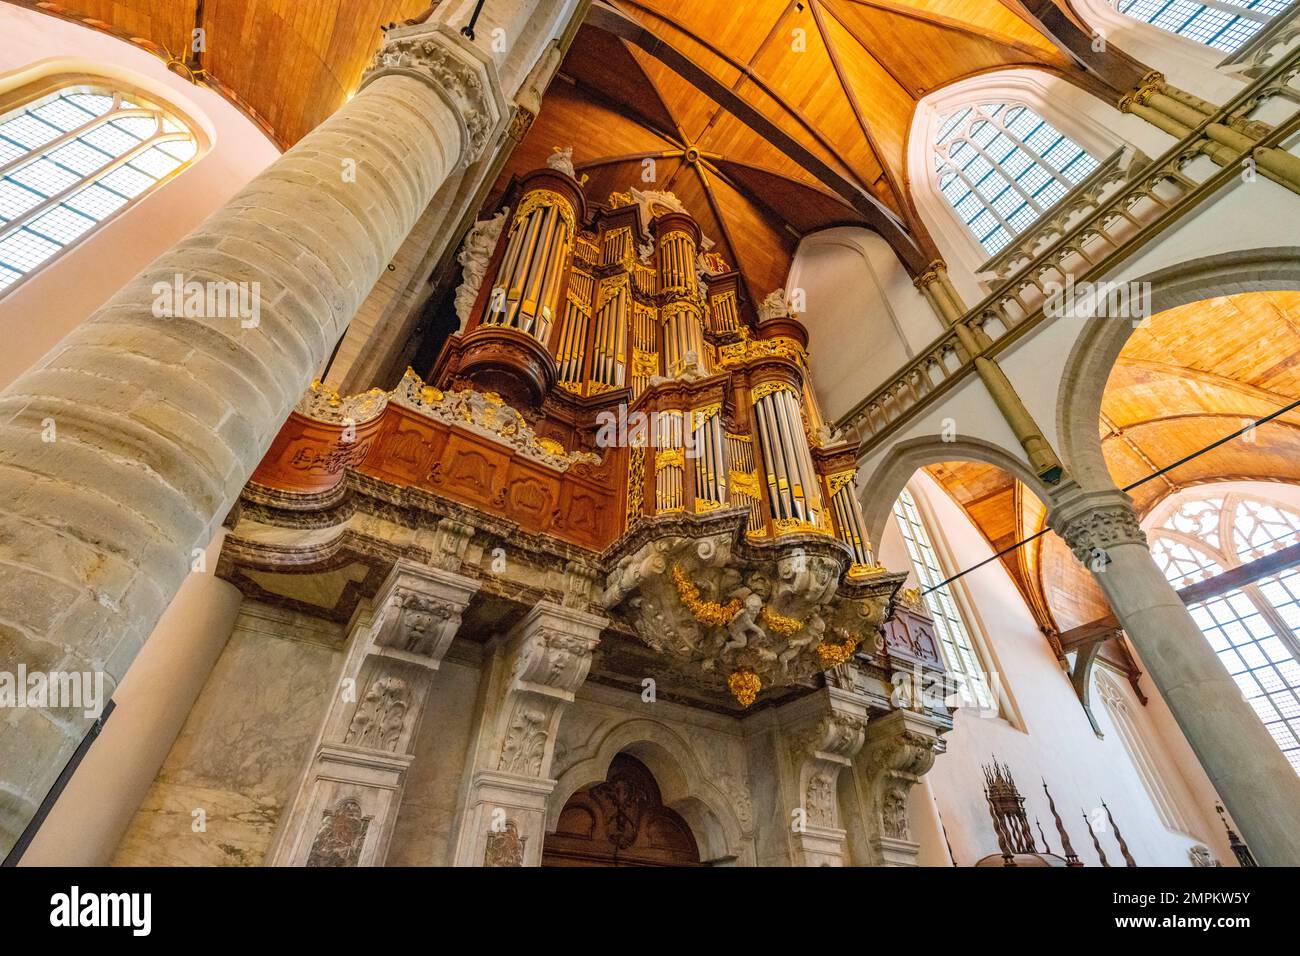 Interiora and great organ of the The Oude Church Amsterdam Netherlands. Stock Photo